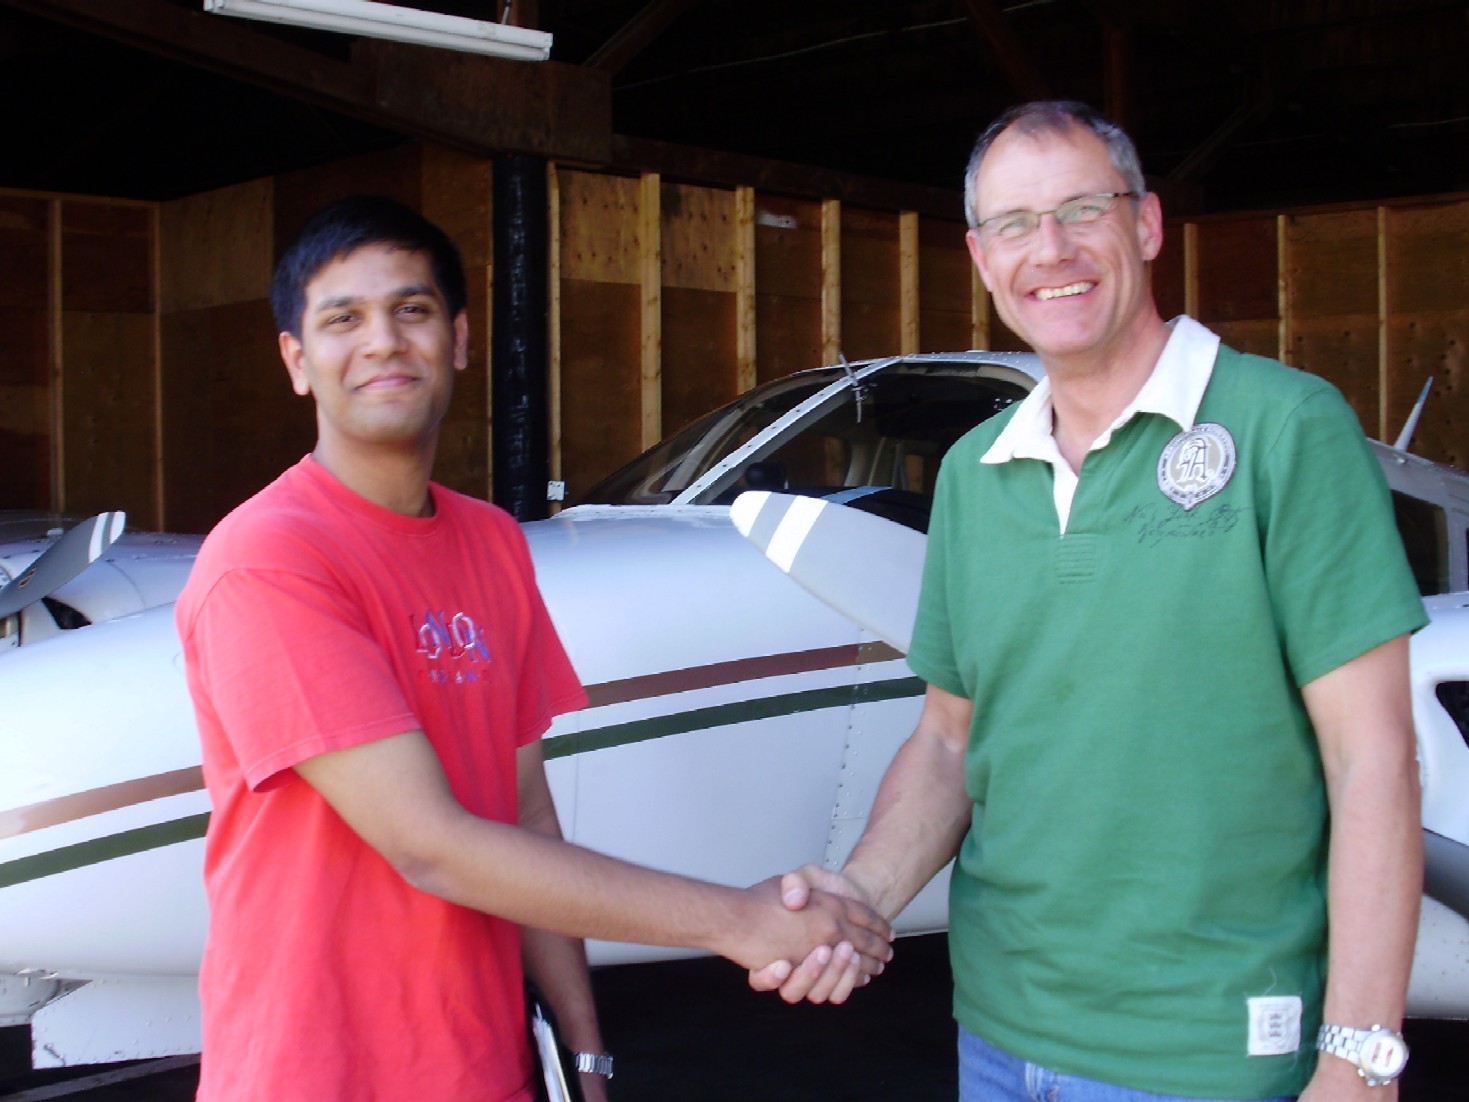 Commercial Pilot Suraj Canakapalli is congratulated by Pilot Examiner Matt Edwards after the successful completion of Suraj's Multi-engine Class Rating Flight Test on June 2, 2009.  Congrats also to Suraj's Flight Instructor Philip Craig.  Langley Flying School.